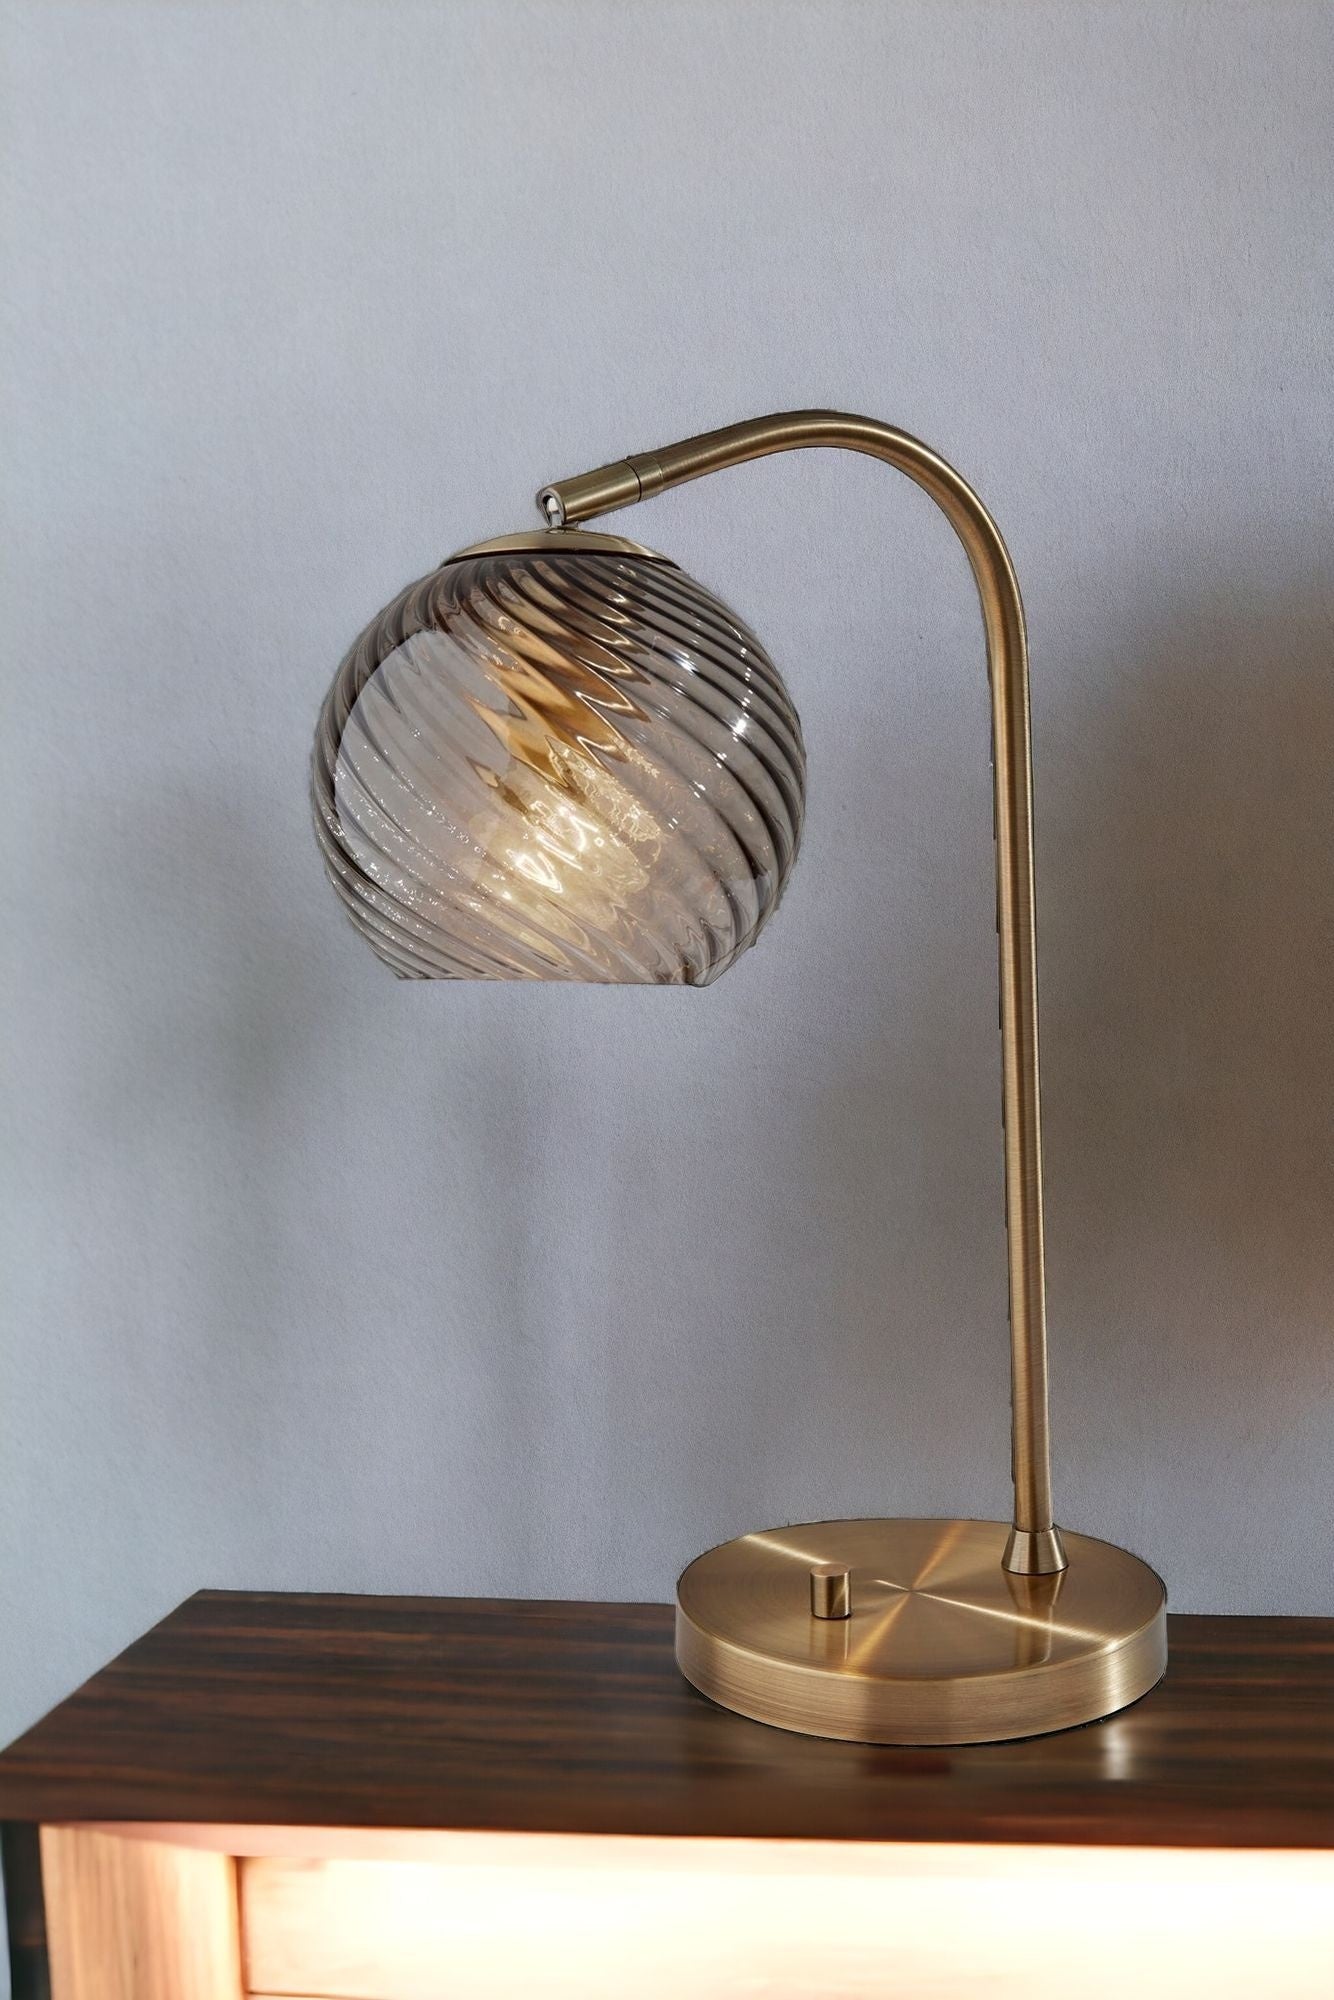 19" Antiqued Brass Metal Cylinder Desk Table Lamp With Gray Swirl Globe Shade